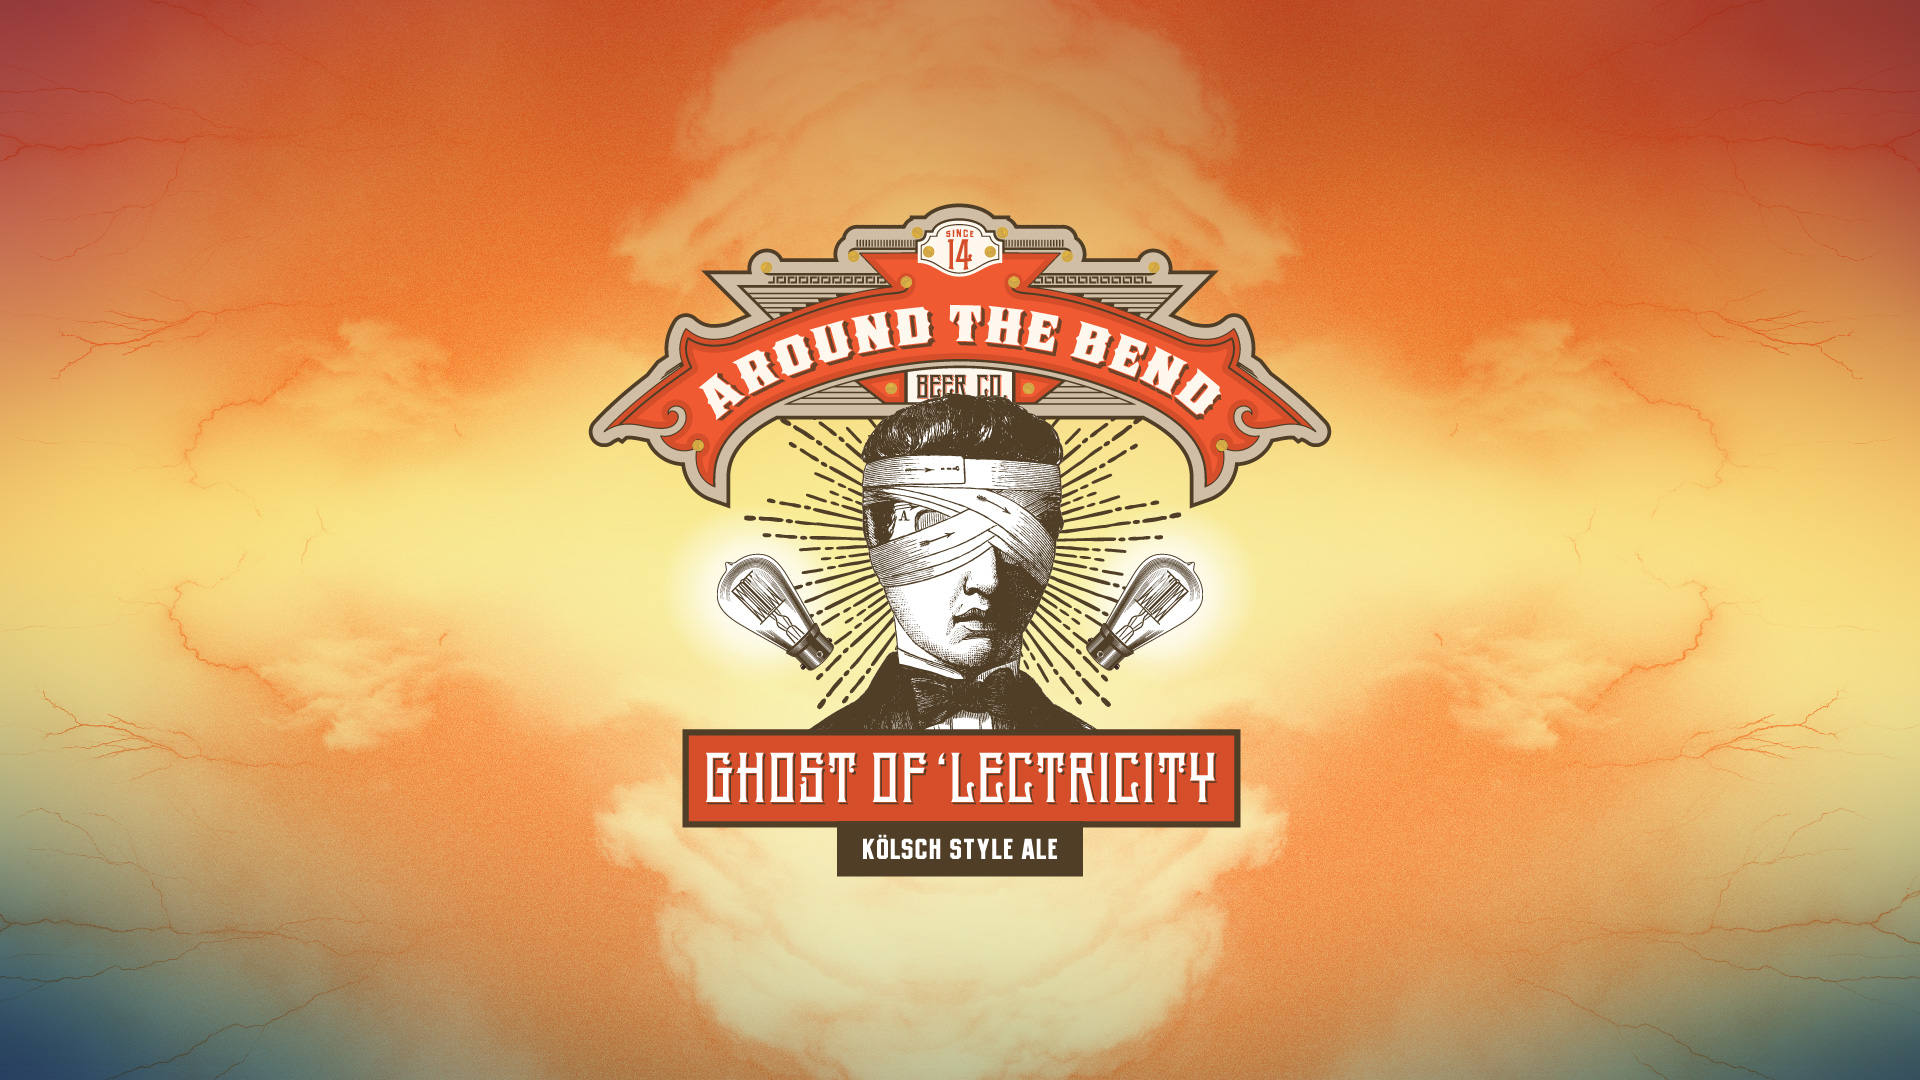 Oz Mfg. Company Around The Bend Beer Co. Ghost of Electricity Kolsch Branding